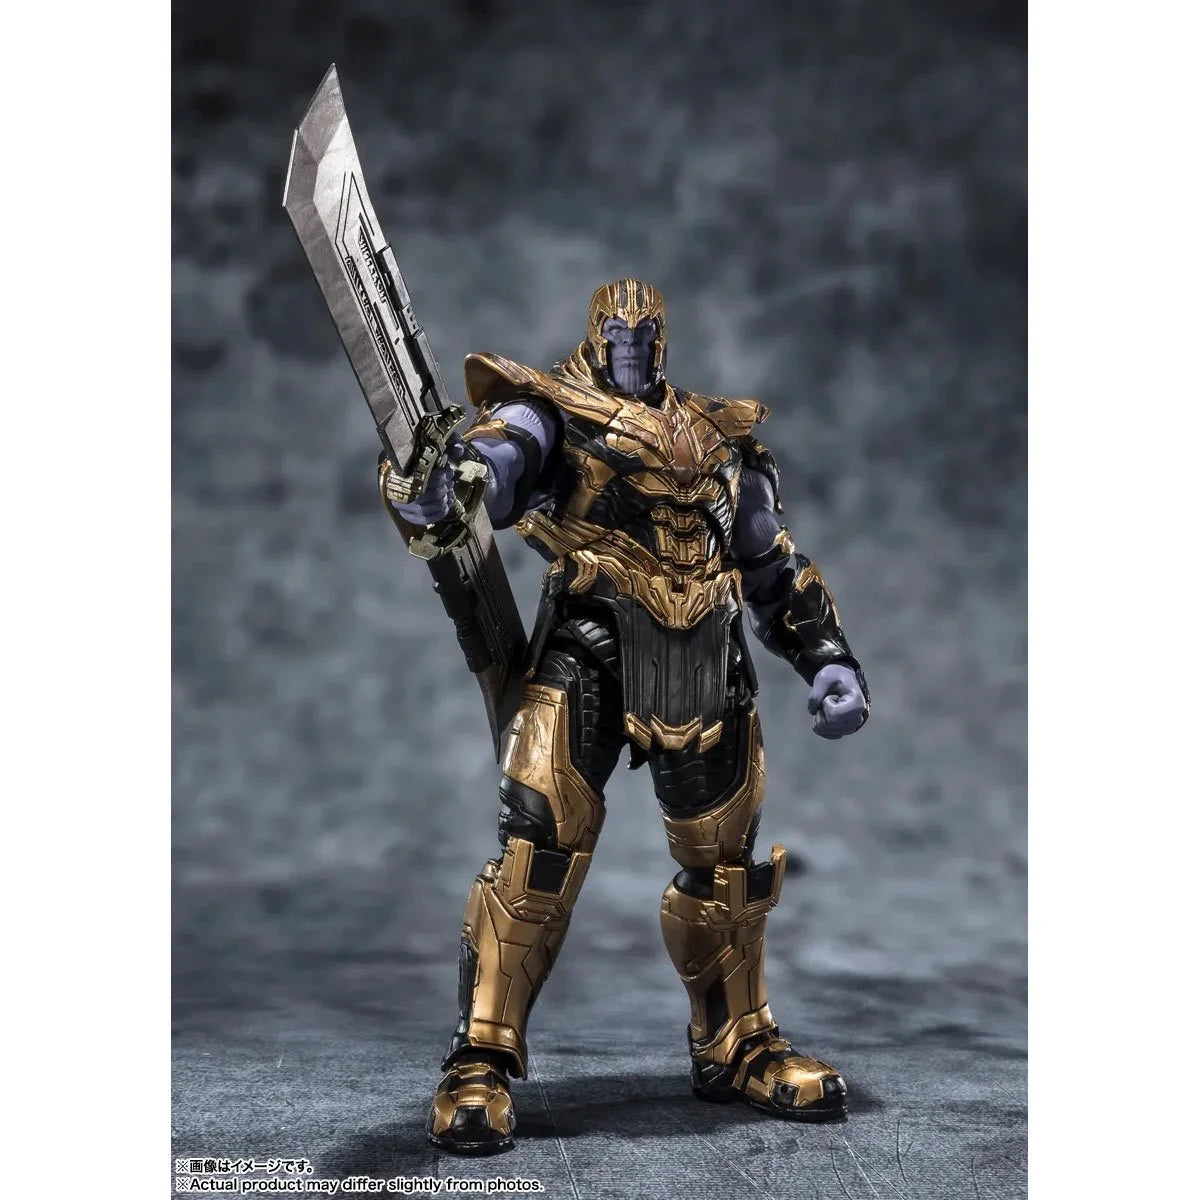 Avengers Endgame Thanos Five Years Later 2023 Edition Infinity Saga Action Figure by S.H.Figuarts -SH Figuarts - India - www.superherotoystore.com